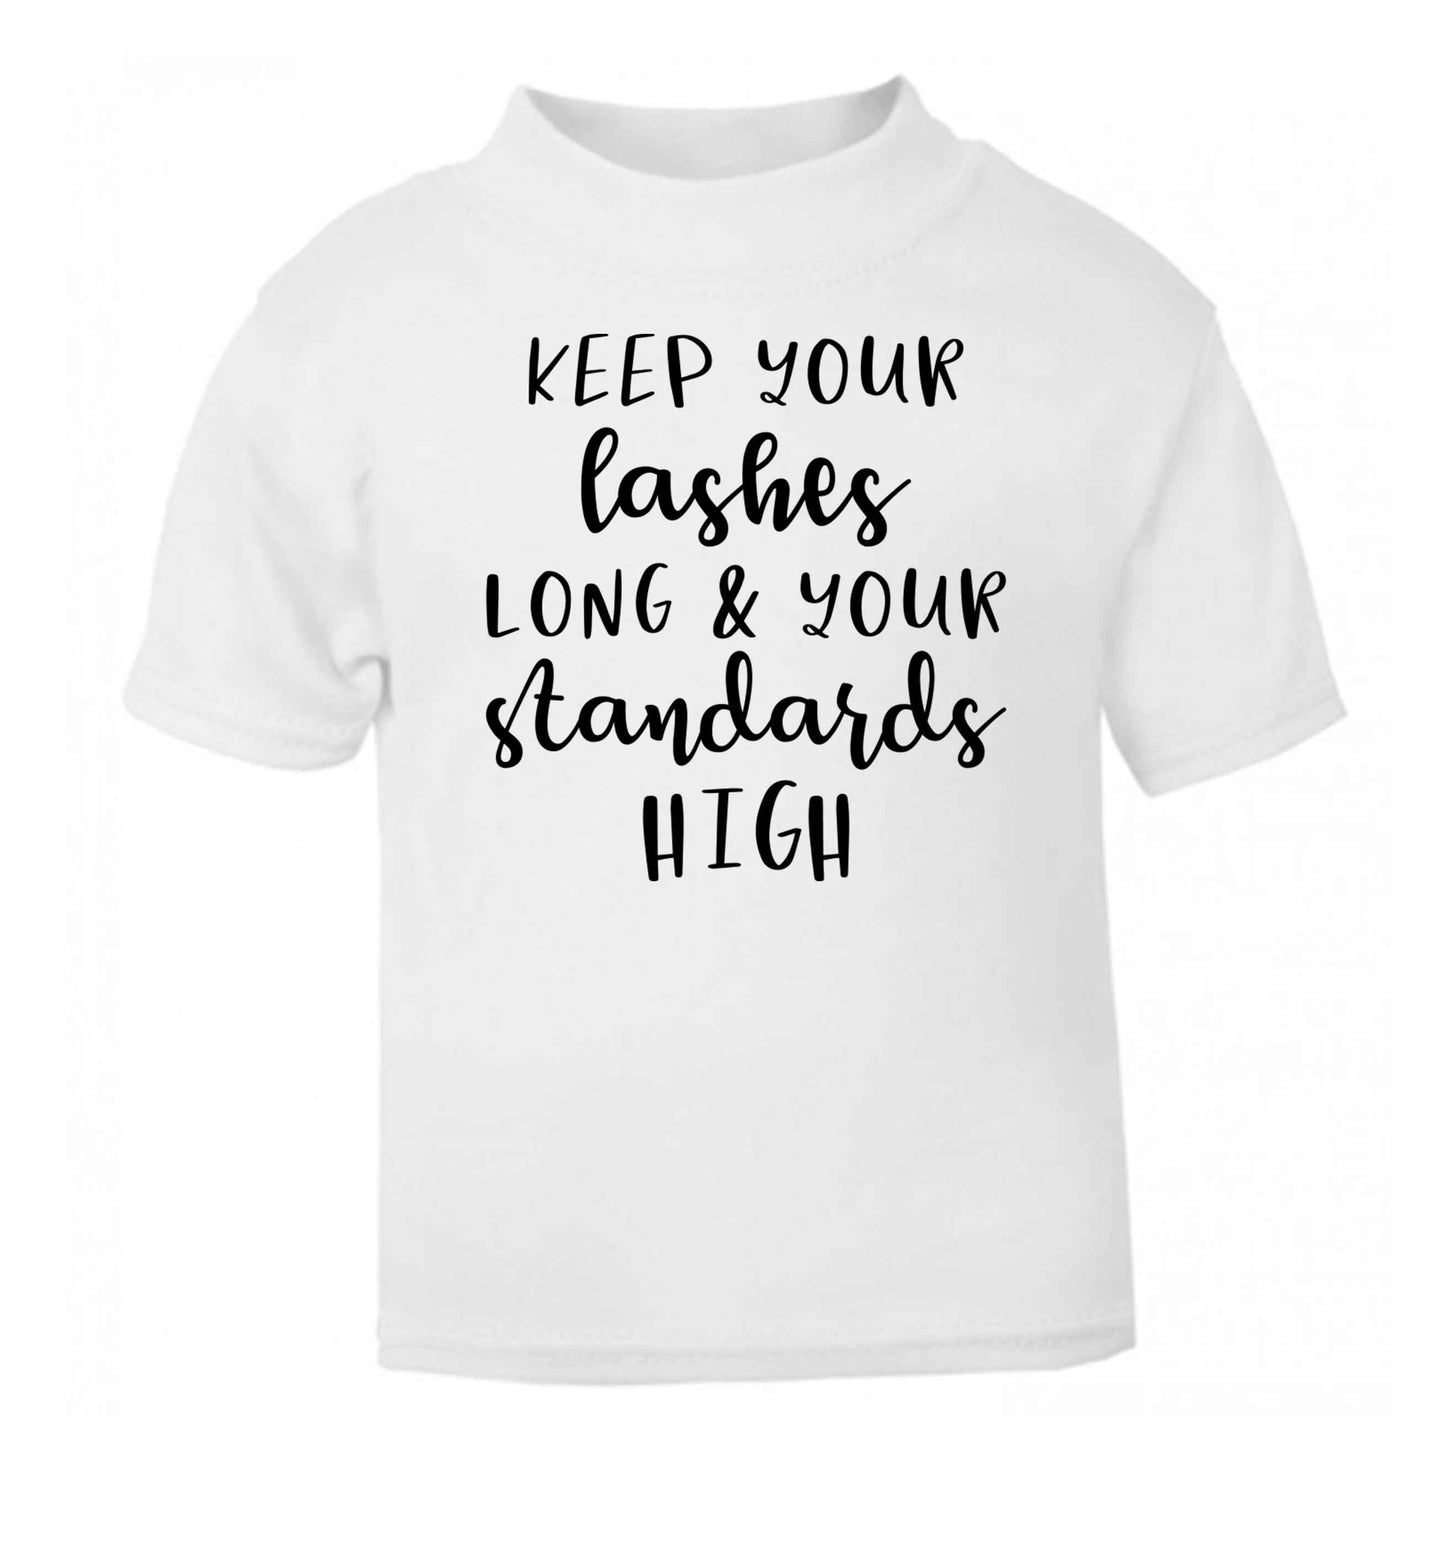 Keep your lashes long and your standards high white Baby Toddler Tshirt 2 Years